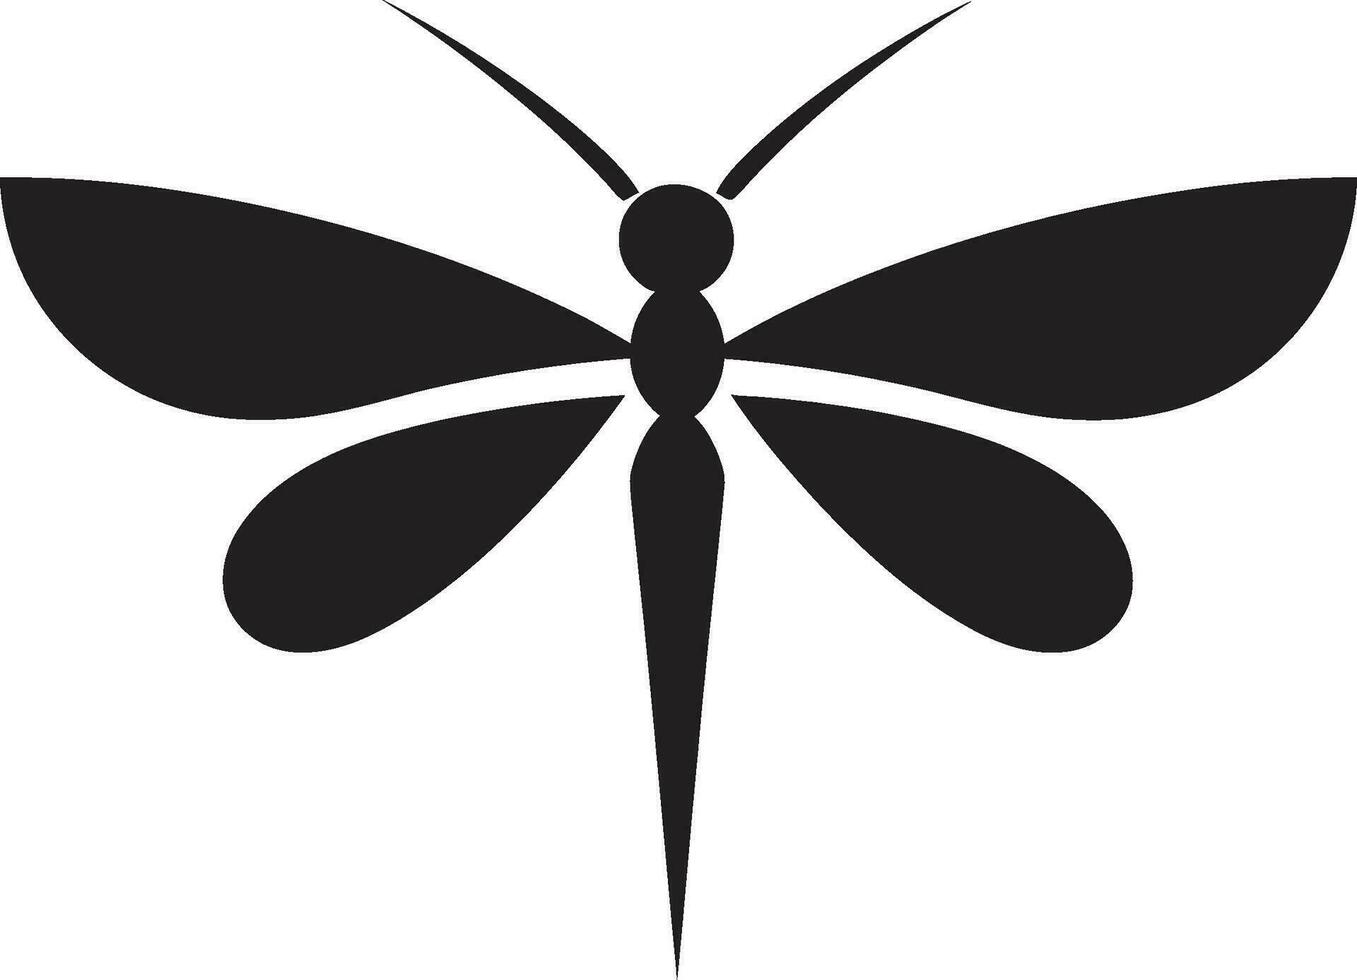 Eclipse Dragonfly Logo Nocturnal Dragonfly Vector Badge